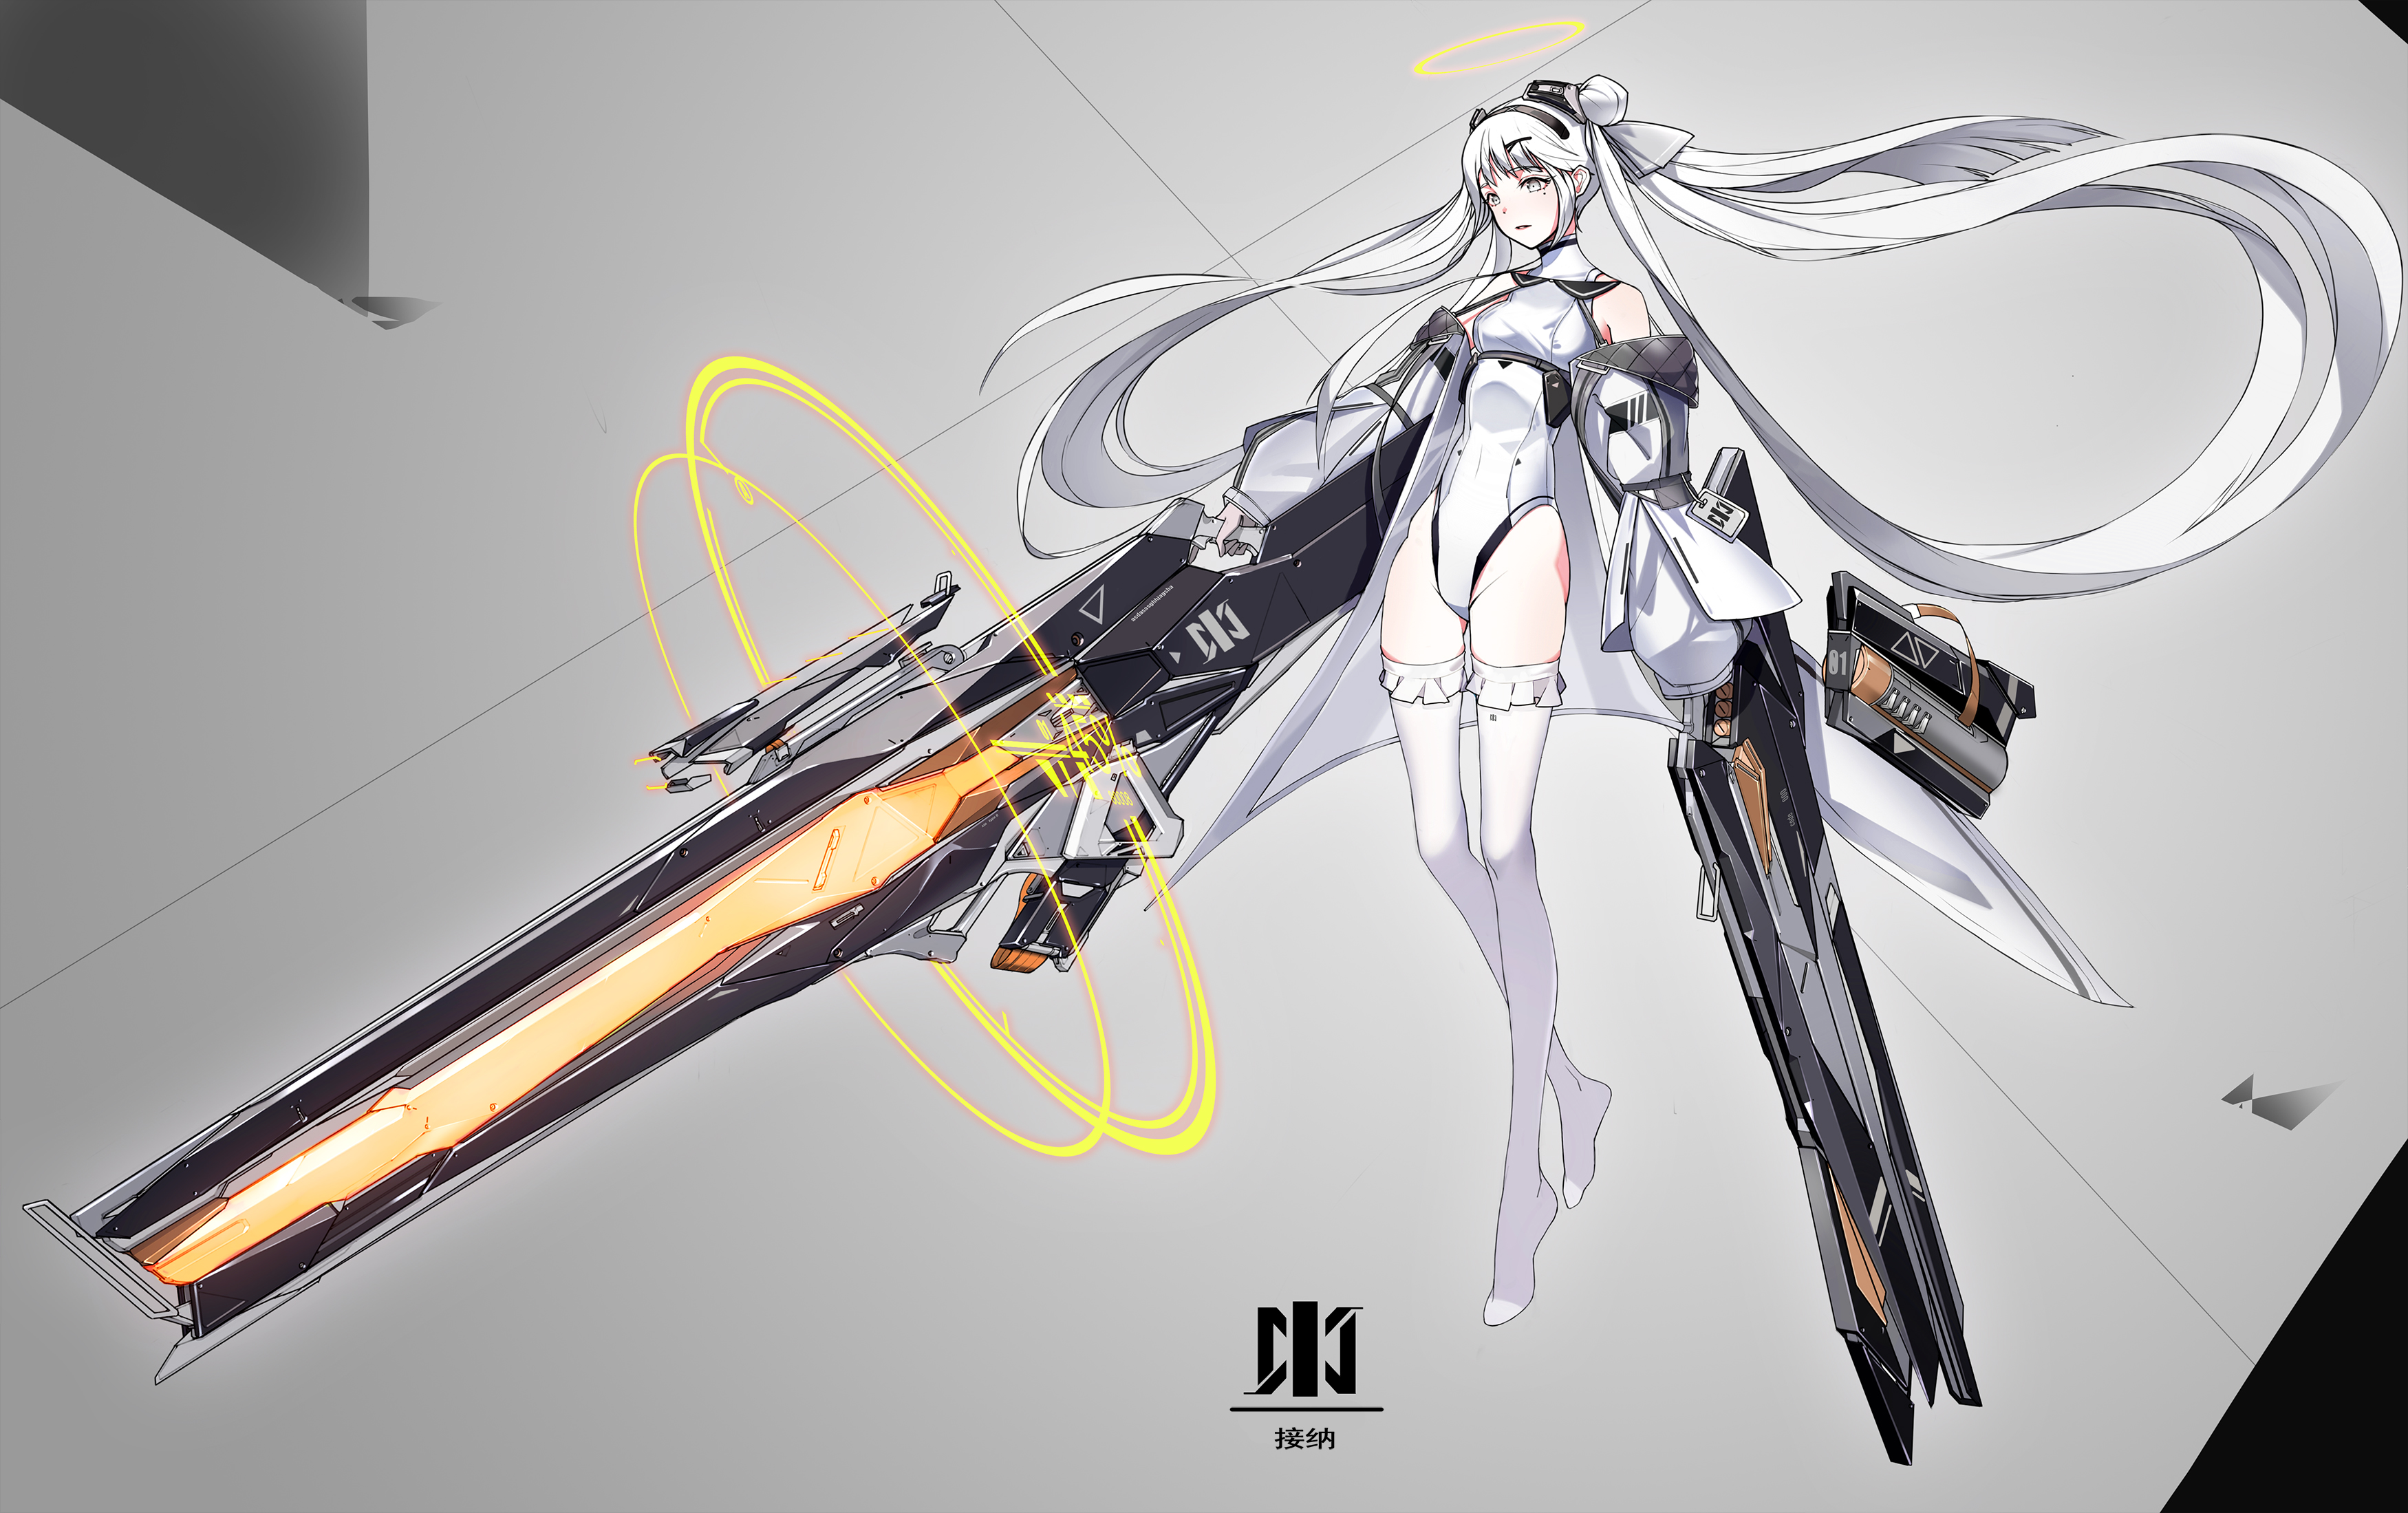 Anime 3500x2199 anime anime girls women with weapons science fiction Xin (artist) women Futuristic Weapons